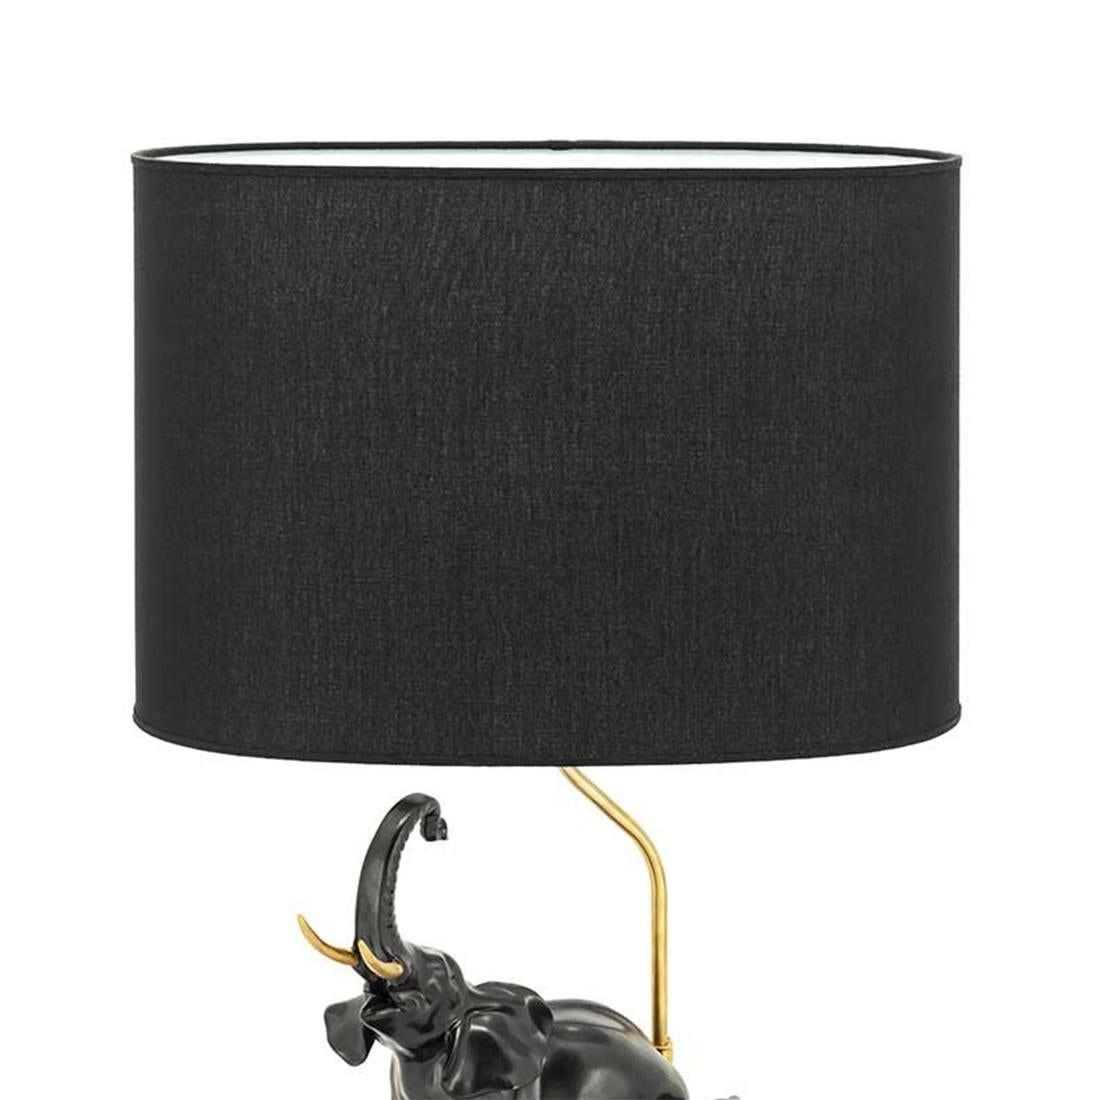 Table Lamp Black Elephants with porcelain base 
in black finish with gilded metal base. With brass
details on base. Shade in coton included.